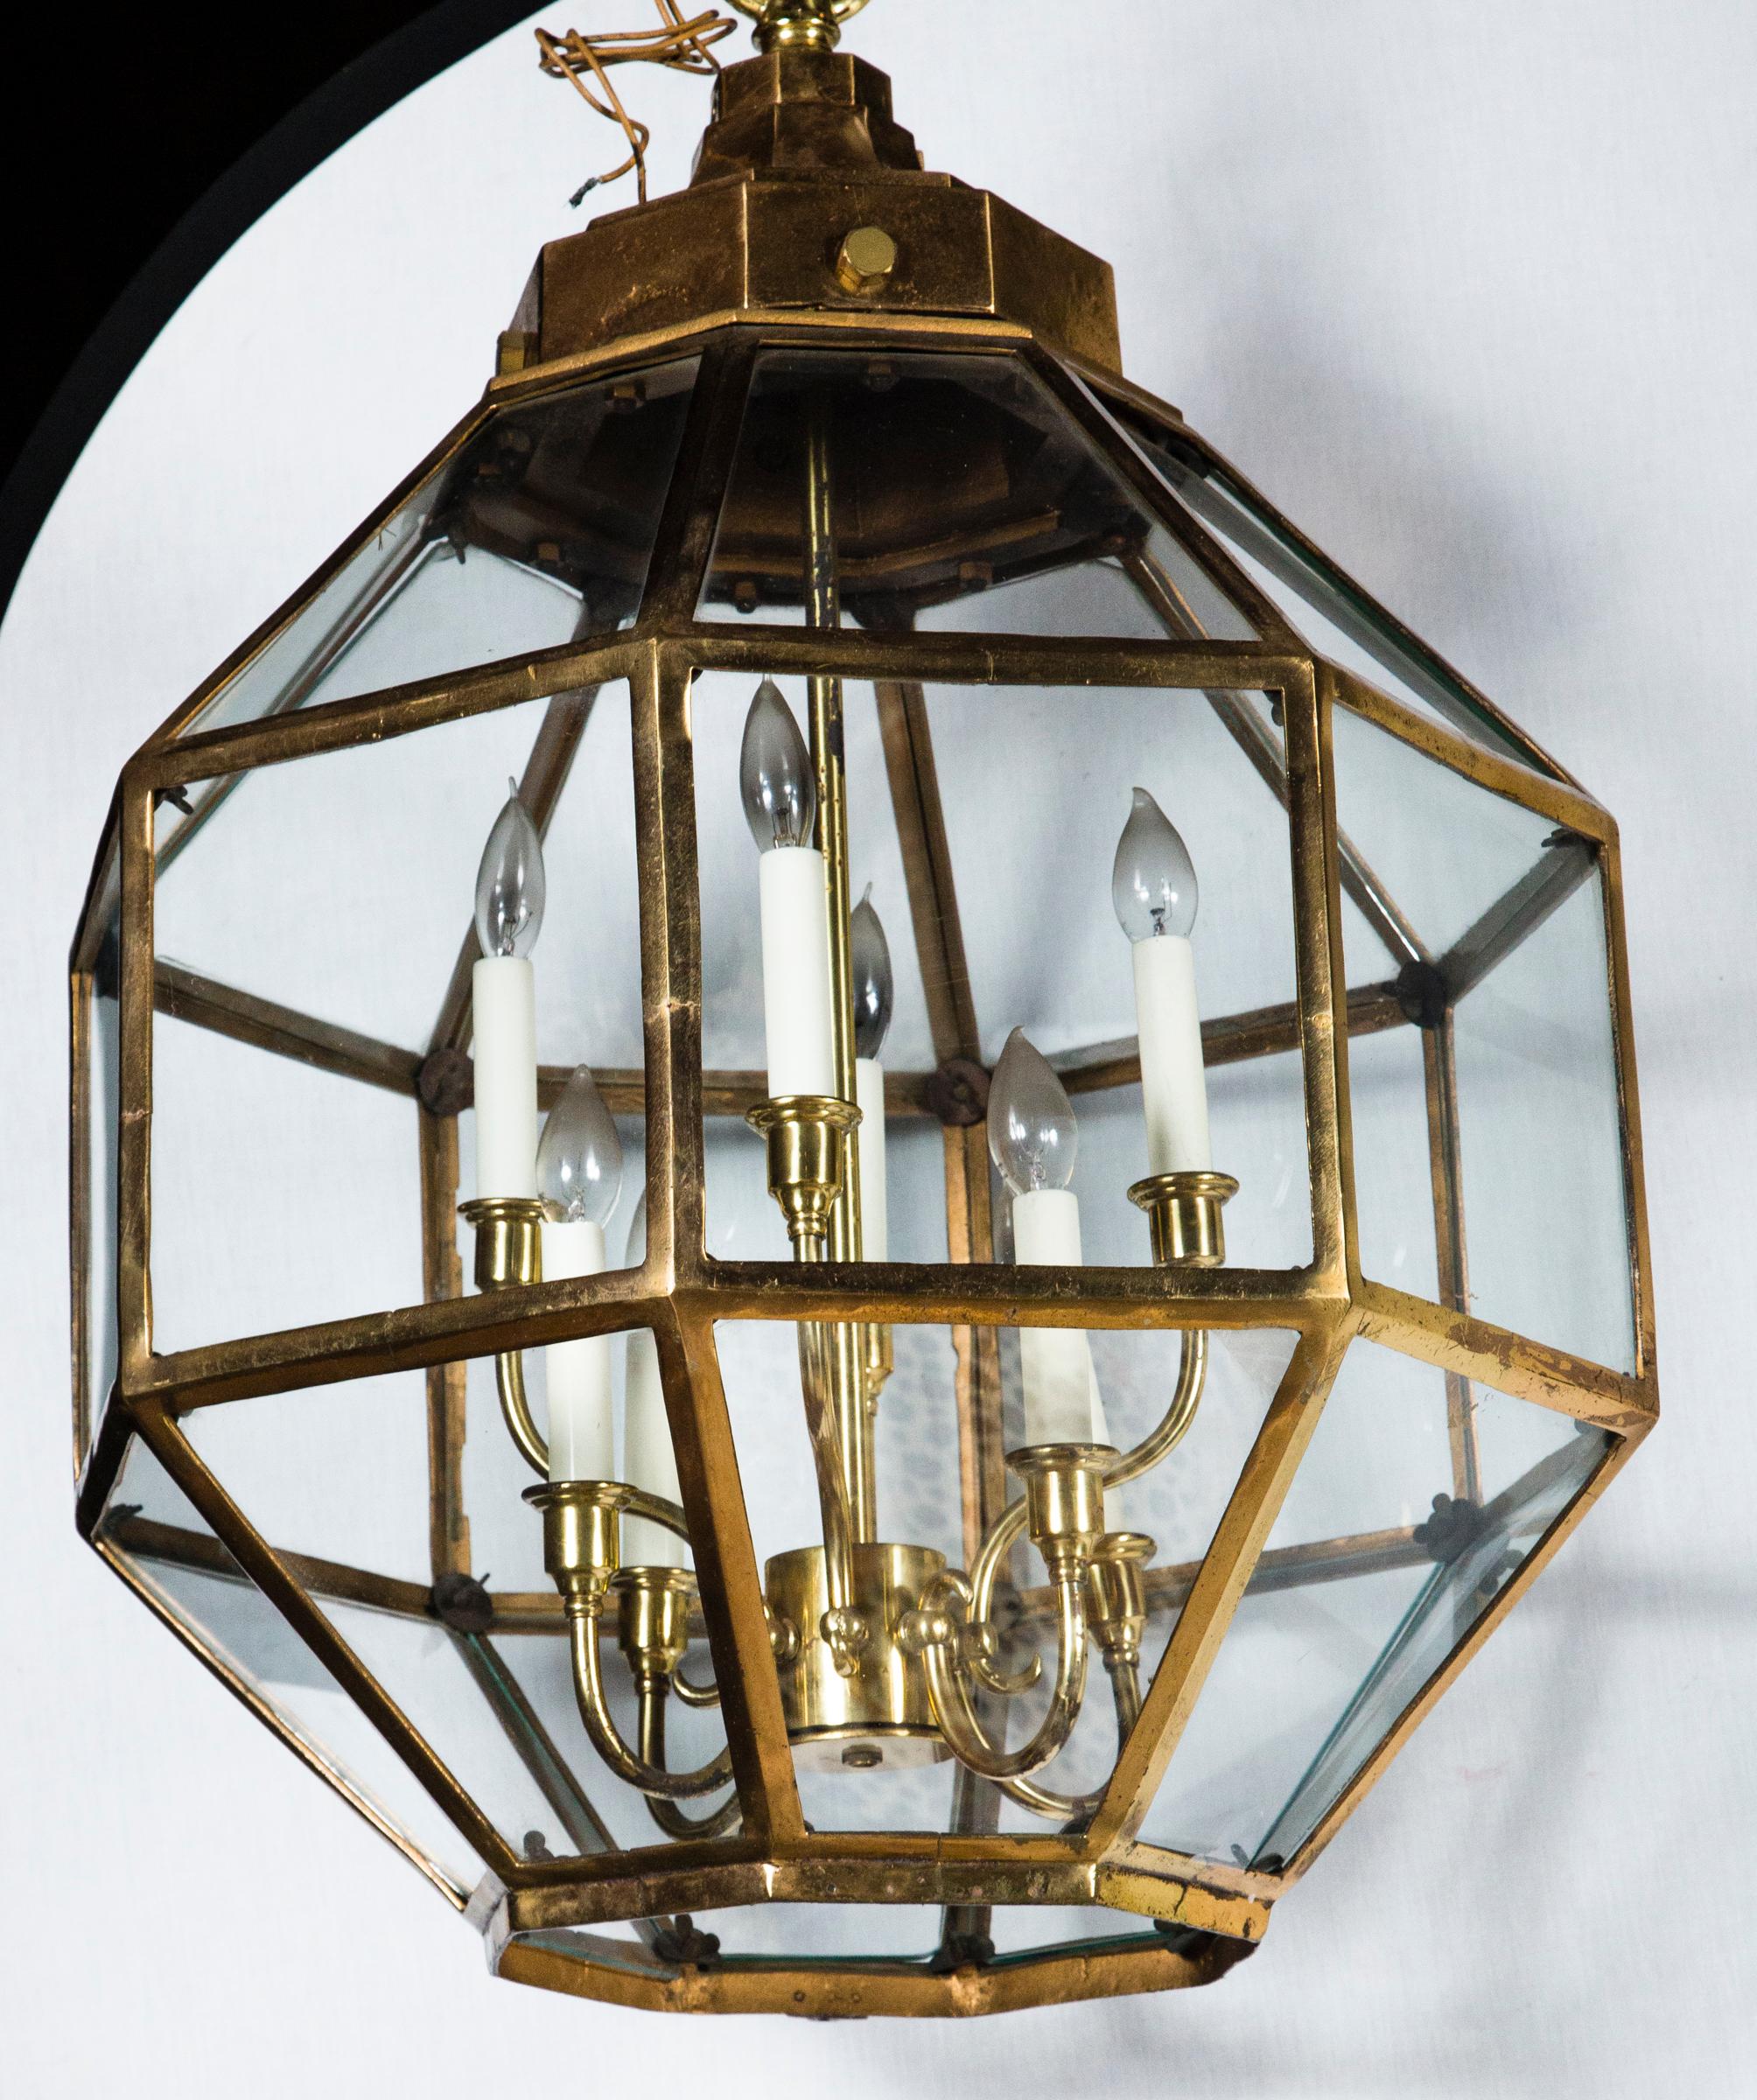 24 pane octagonal brass lantern. Eight lights, two tiers of four lights. Very heavy substantial piece. Old new stock, circa 1960s.